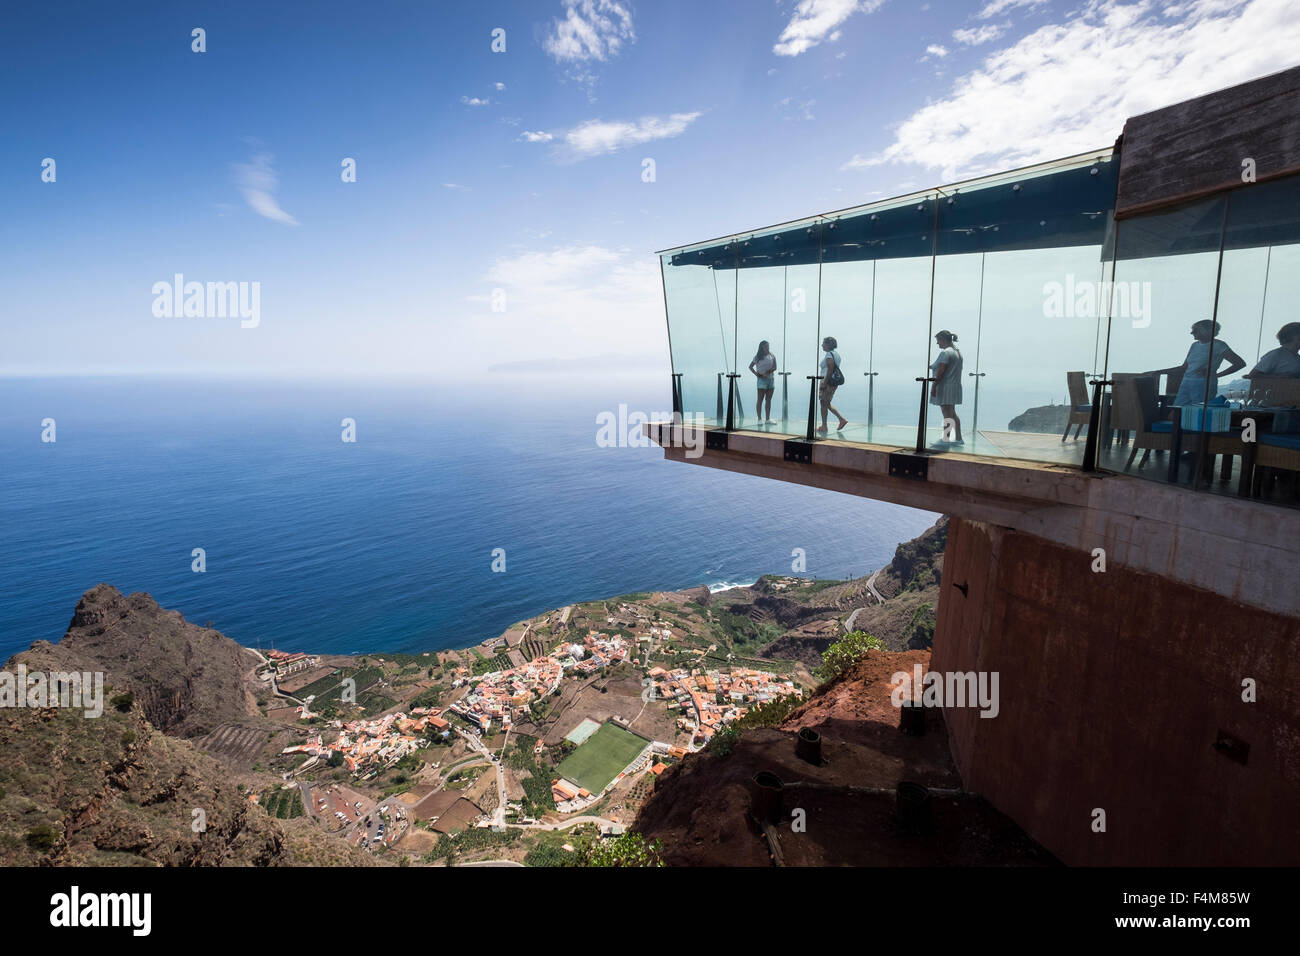 The Mirador de Abrante with its glass floor projecting out from the clifftop above Agulo, La Gomera, canary Islands, Spain. Stock Photo